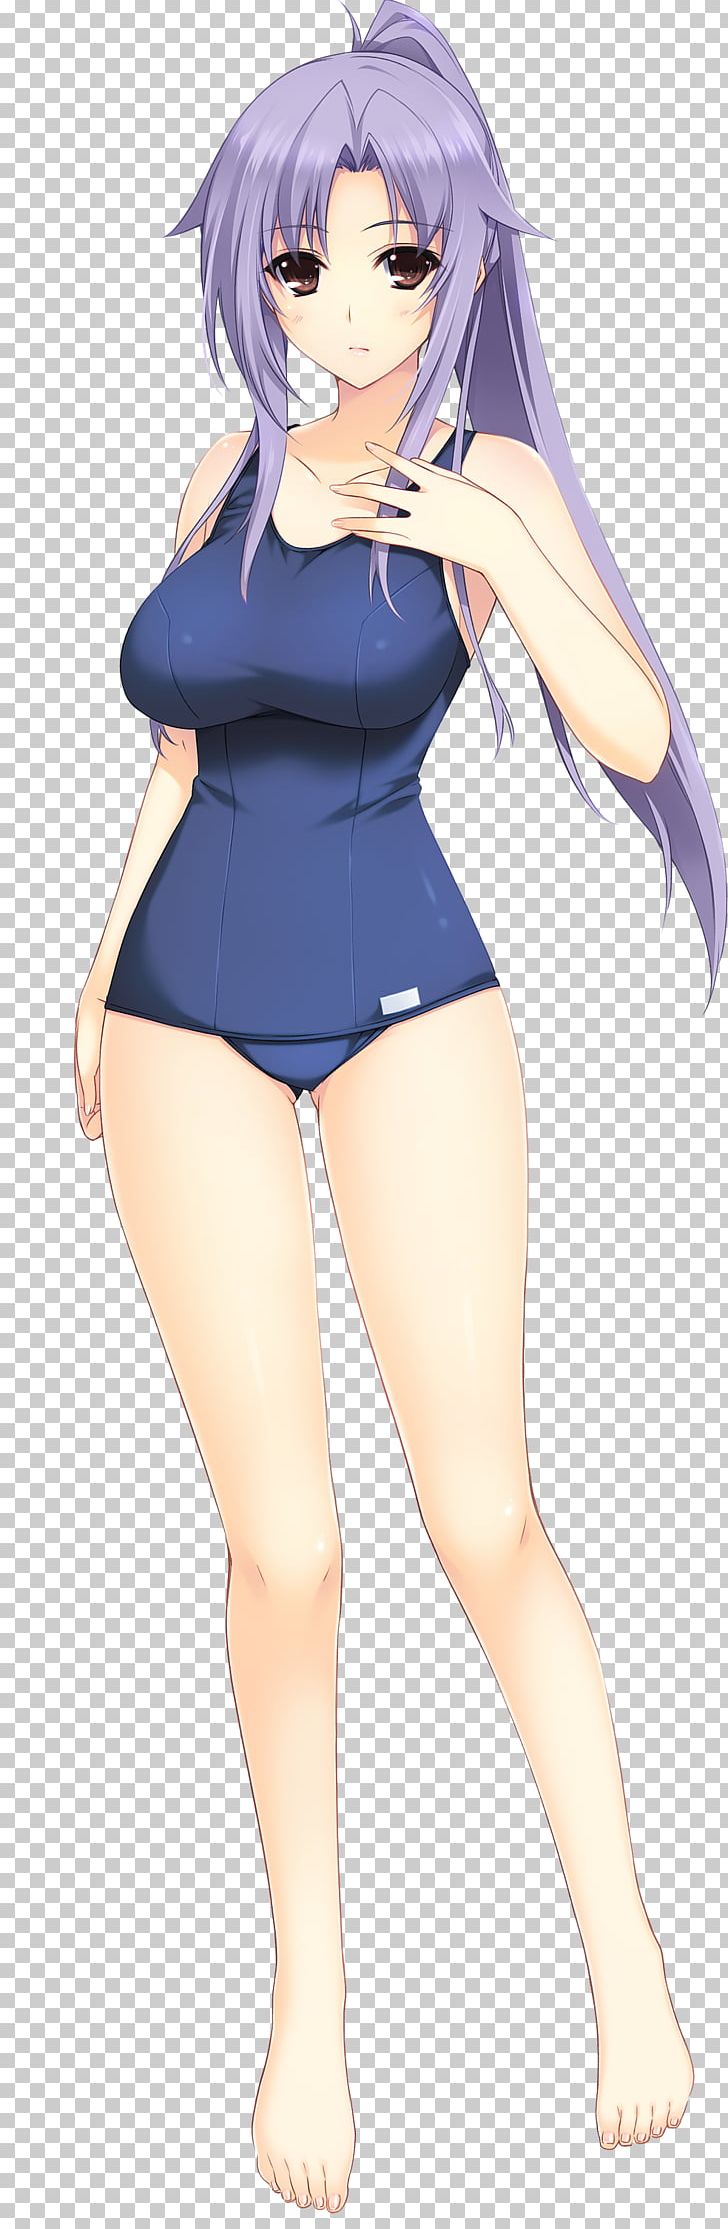 Lovely X Cation Playstation Vita Japan Illustrator Shoe Png Clipart Abdomen Anime Arm Black Hair Breasts